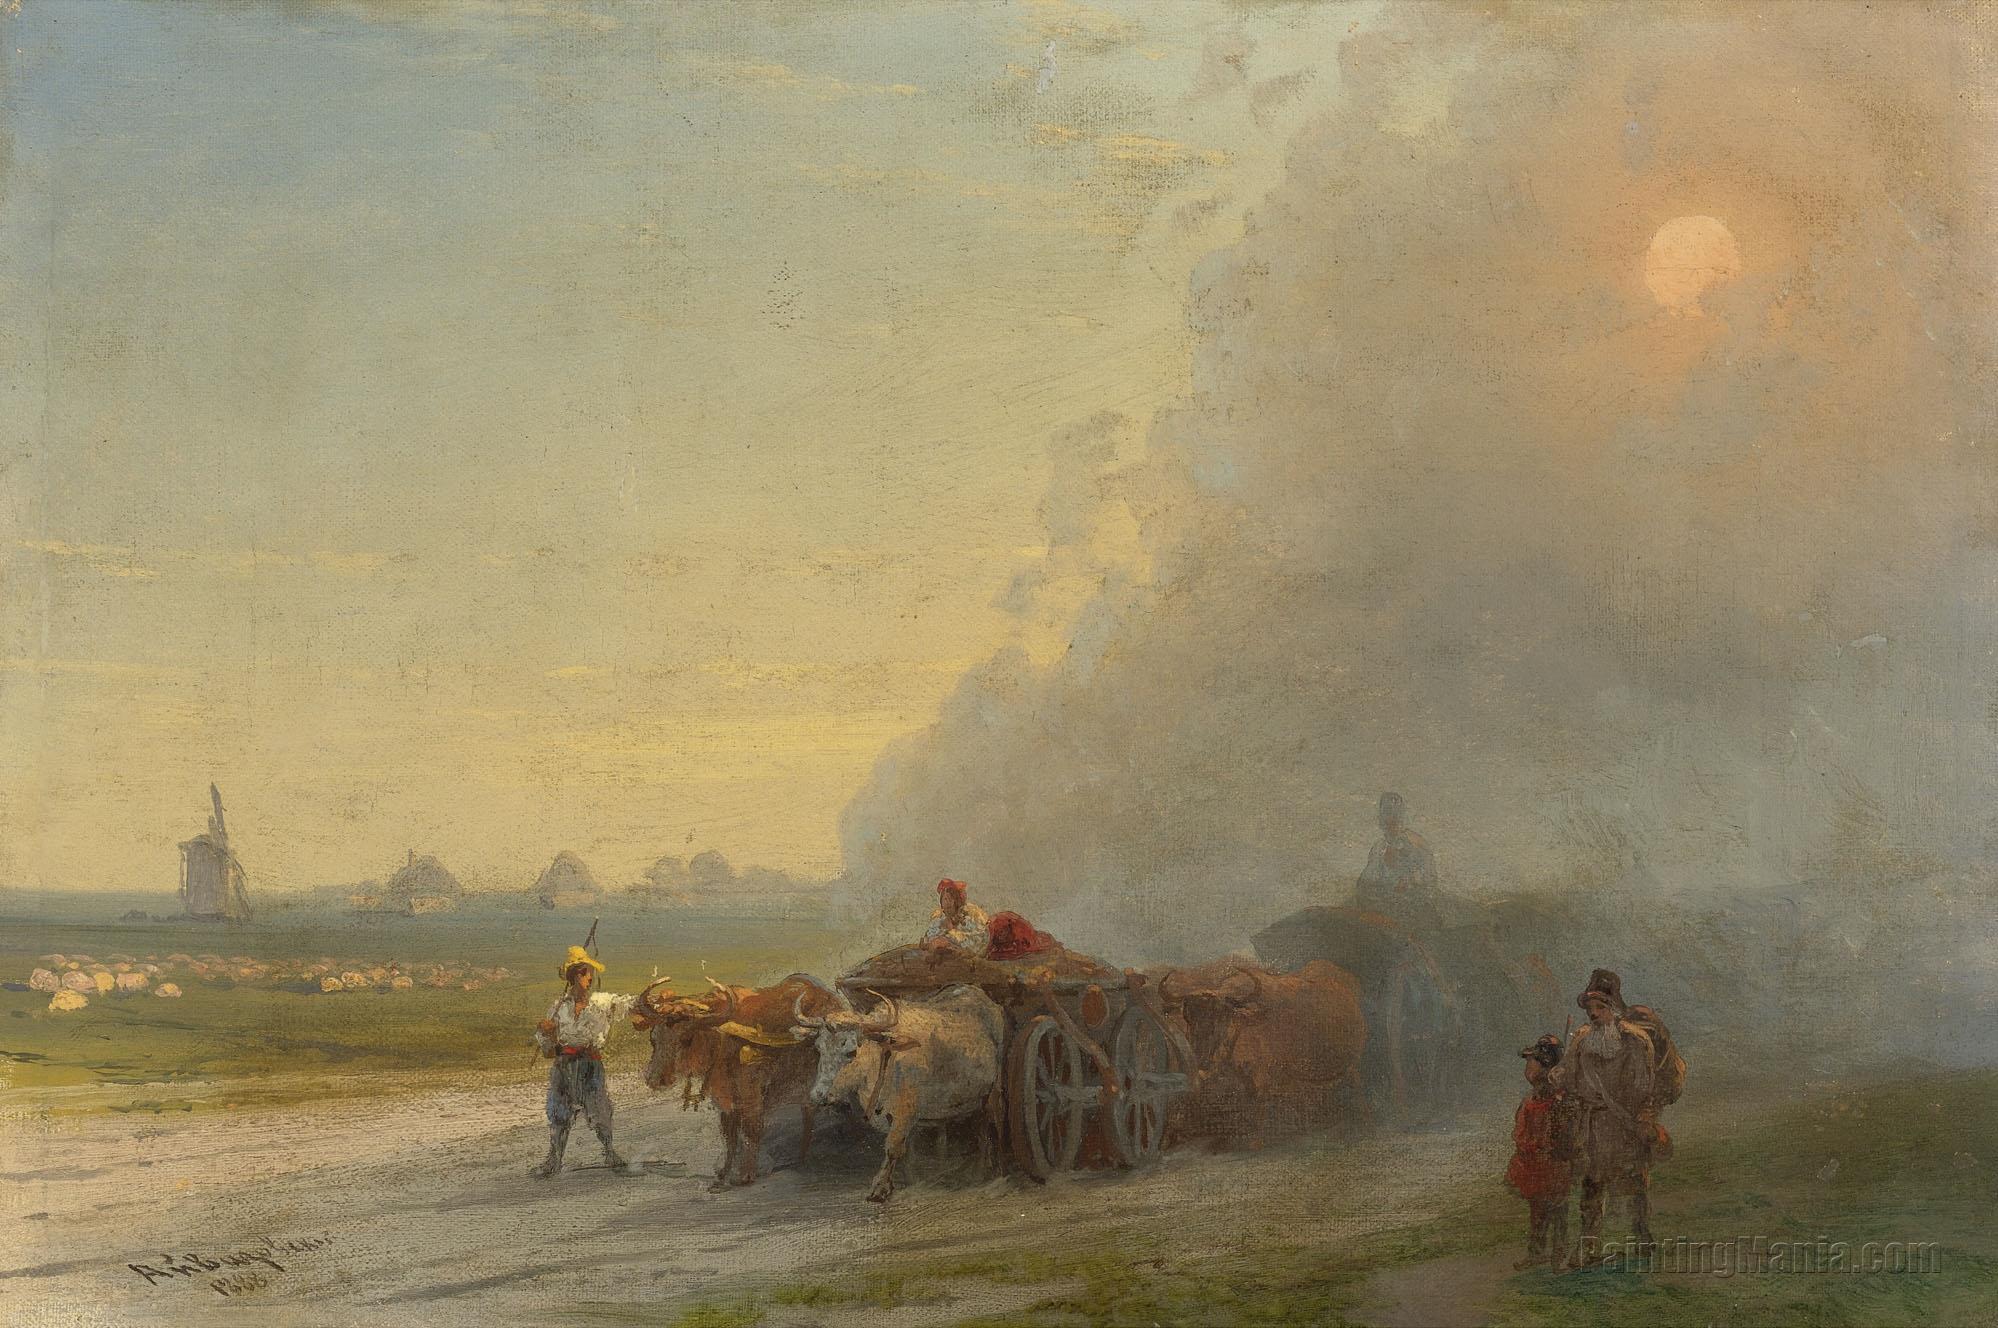 Ox Carts in the Ukrainian Steppe